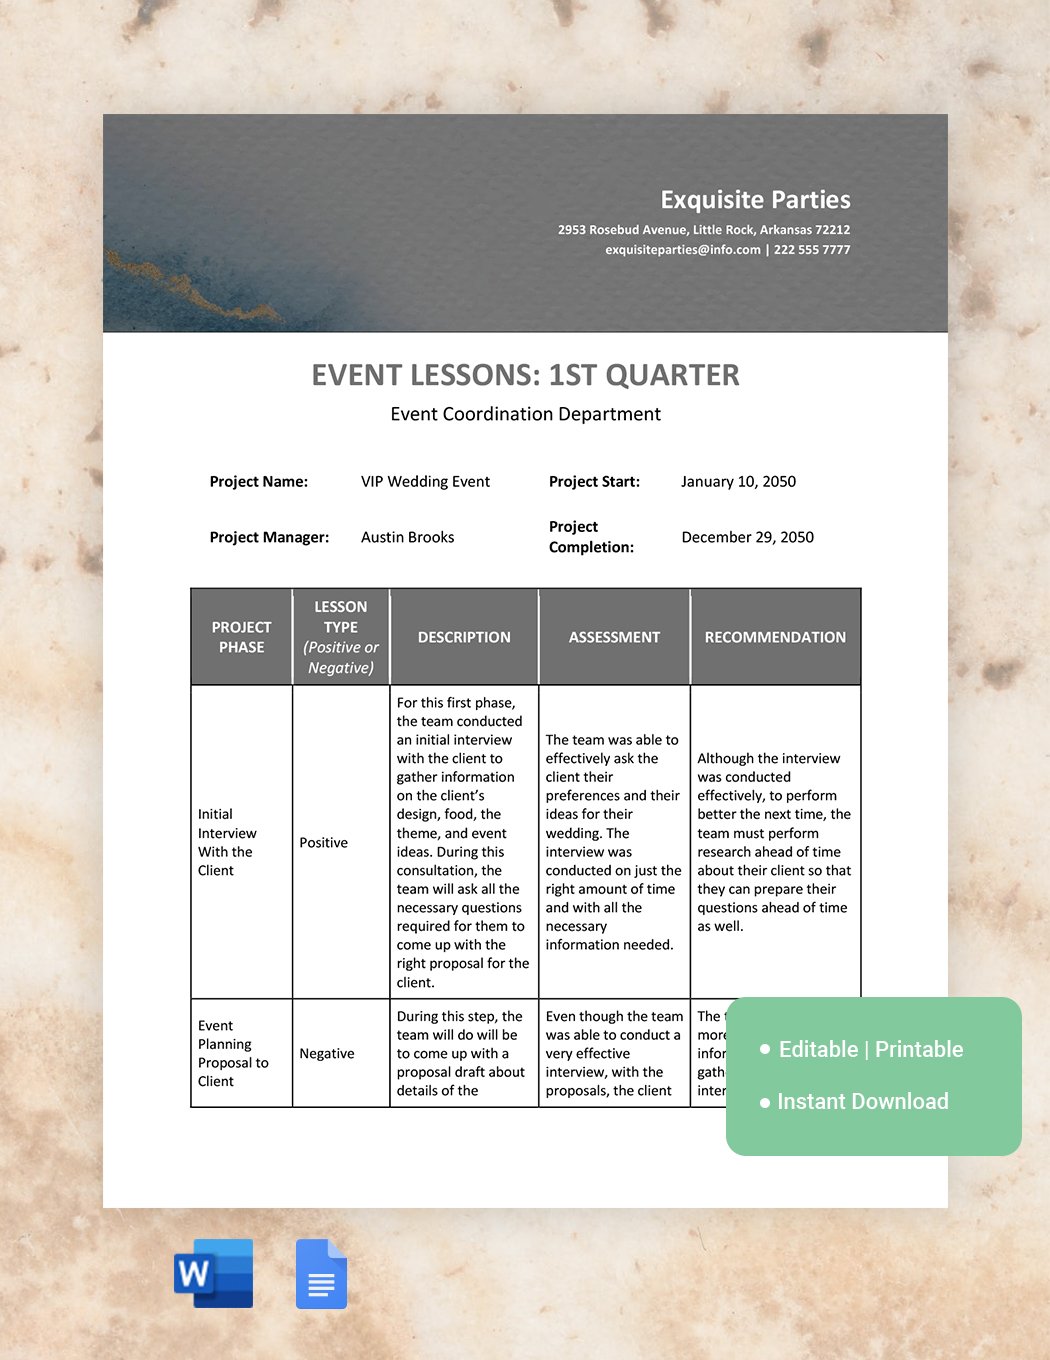 Event Lessons Learned Template